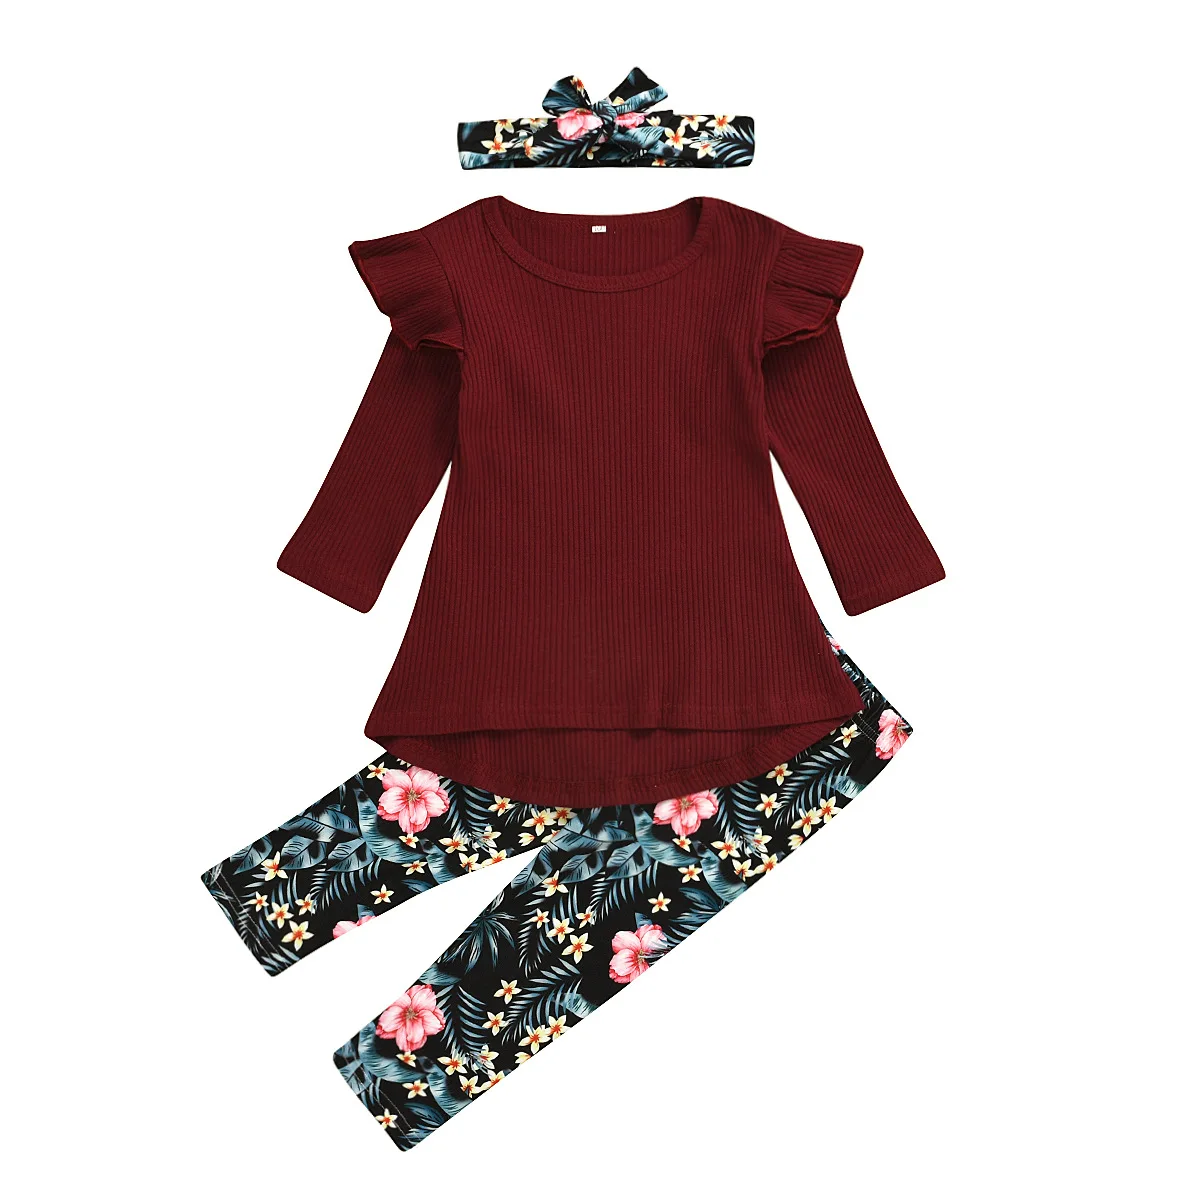 

New 2020 wear amazon hot style girls pit tshirt flower pants suit three pieces wear children clothes for hot selling, As pic shows, we can according to your request also